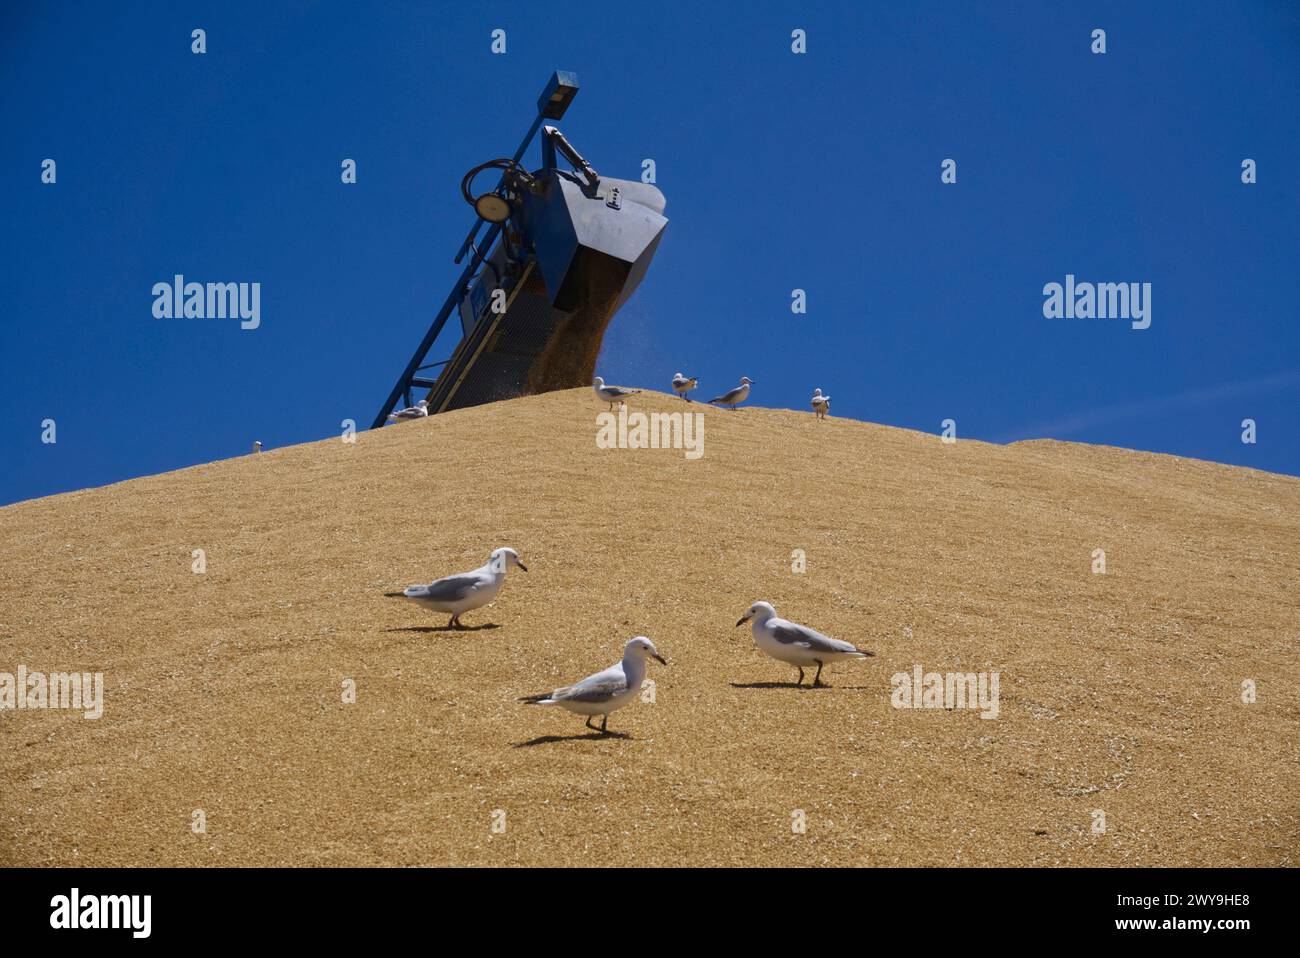 Silver gulls collecting snails and ladybird insects from freshly harvested Wheat grain being stored in a bunker Arno Bay South Australia Stock Photo